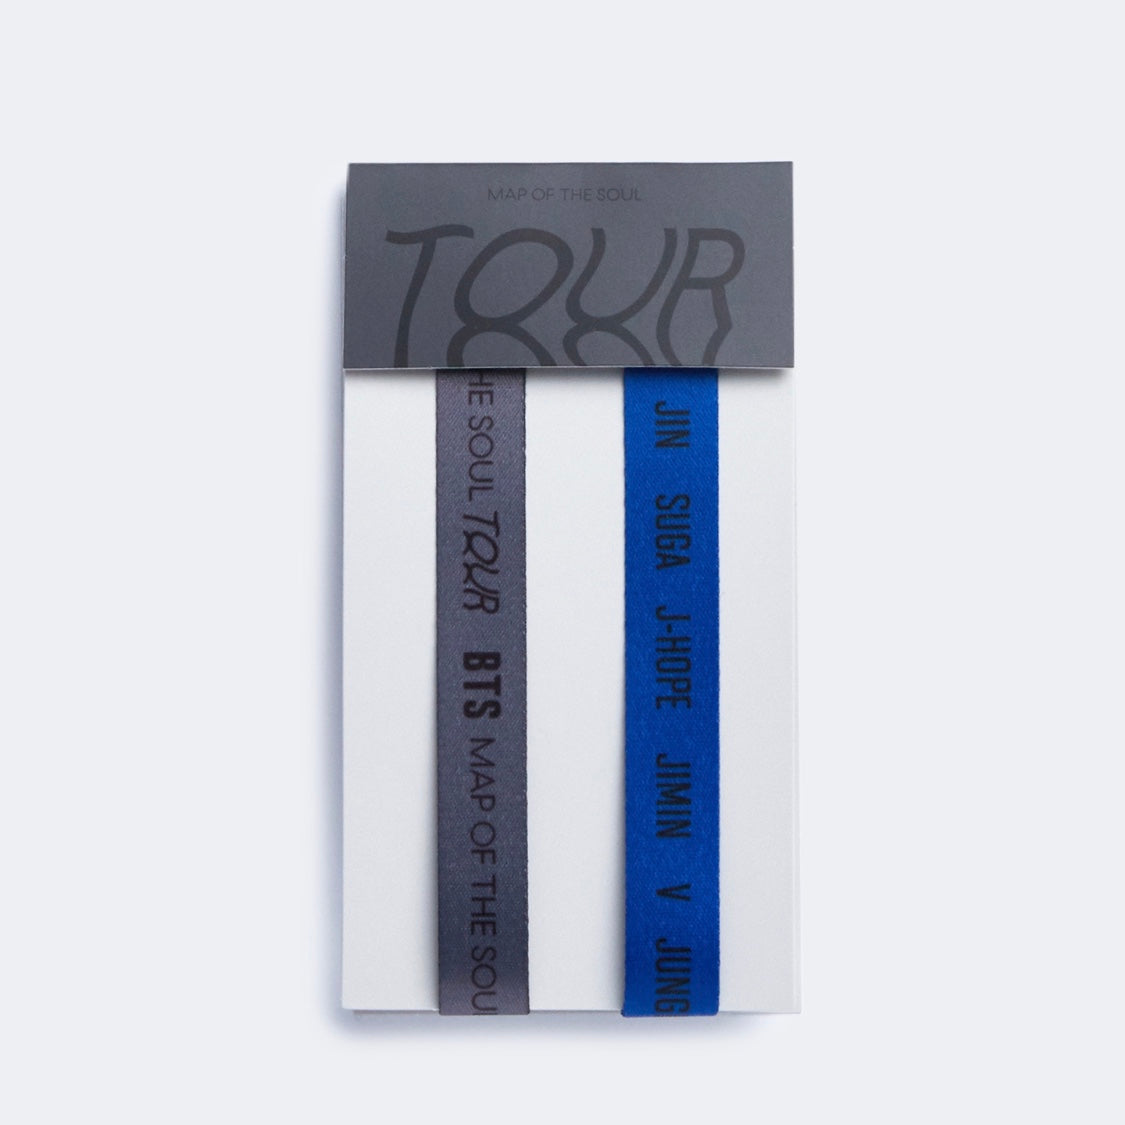 [BTS] Map Of The Soul Tour : Phone Strap + Photocard